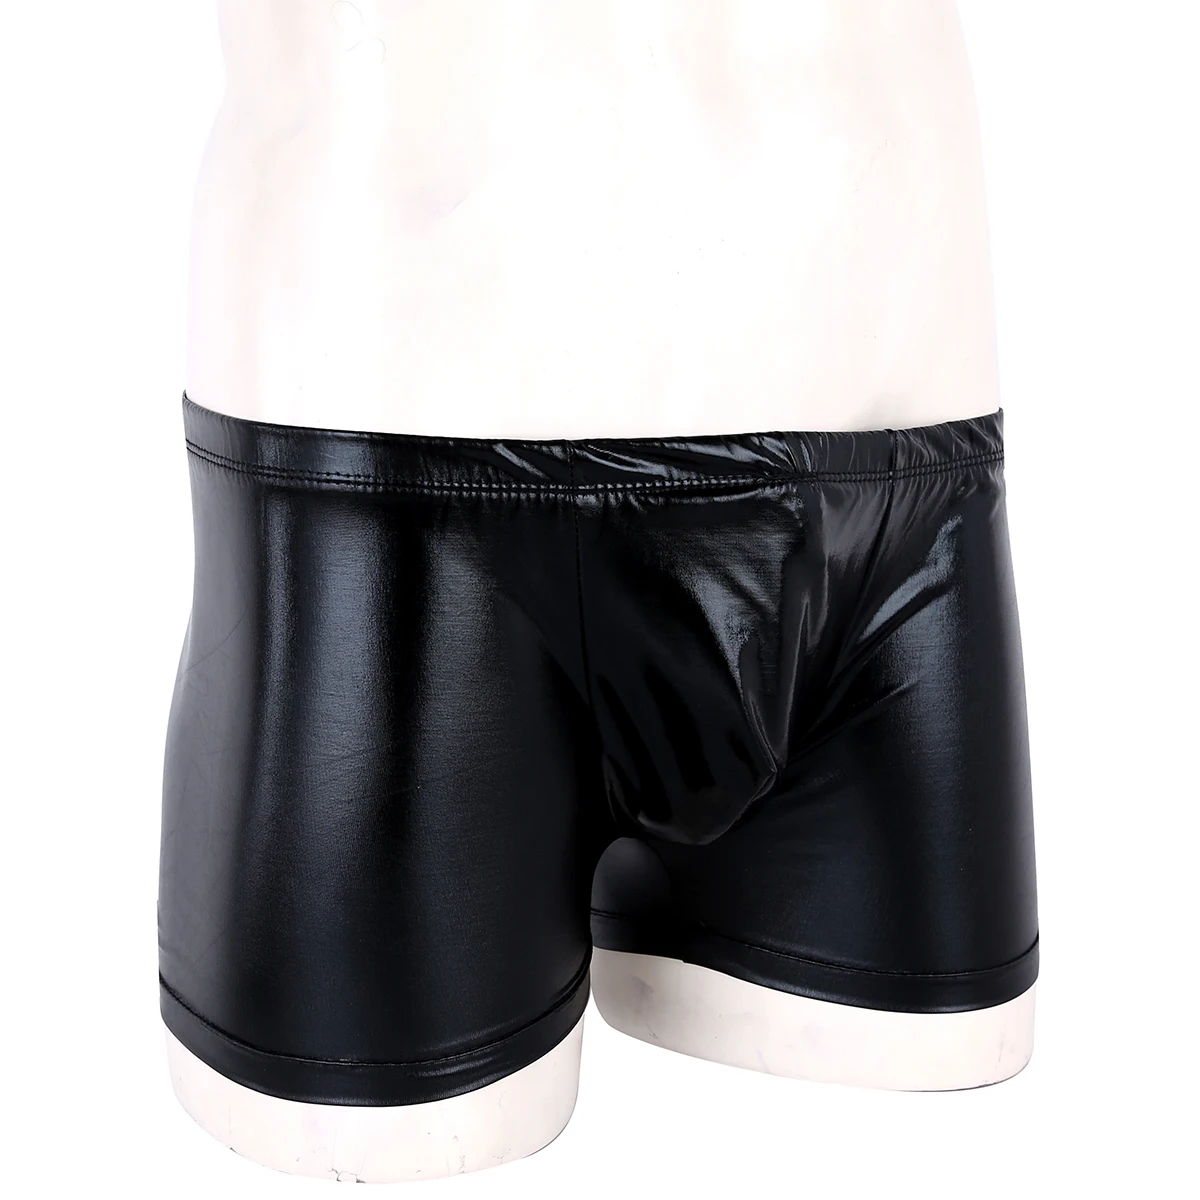 Mens Exotic Latex Underwear Leather Hot Sexy Boxer Brief With A Metal Ring Underwear With Penis Sleeve Sheath Lingerie Shorts